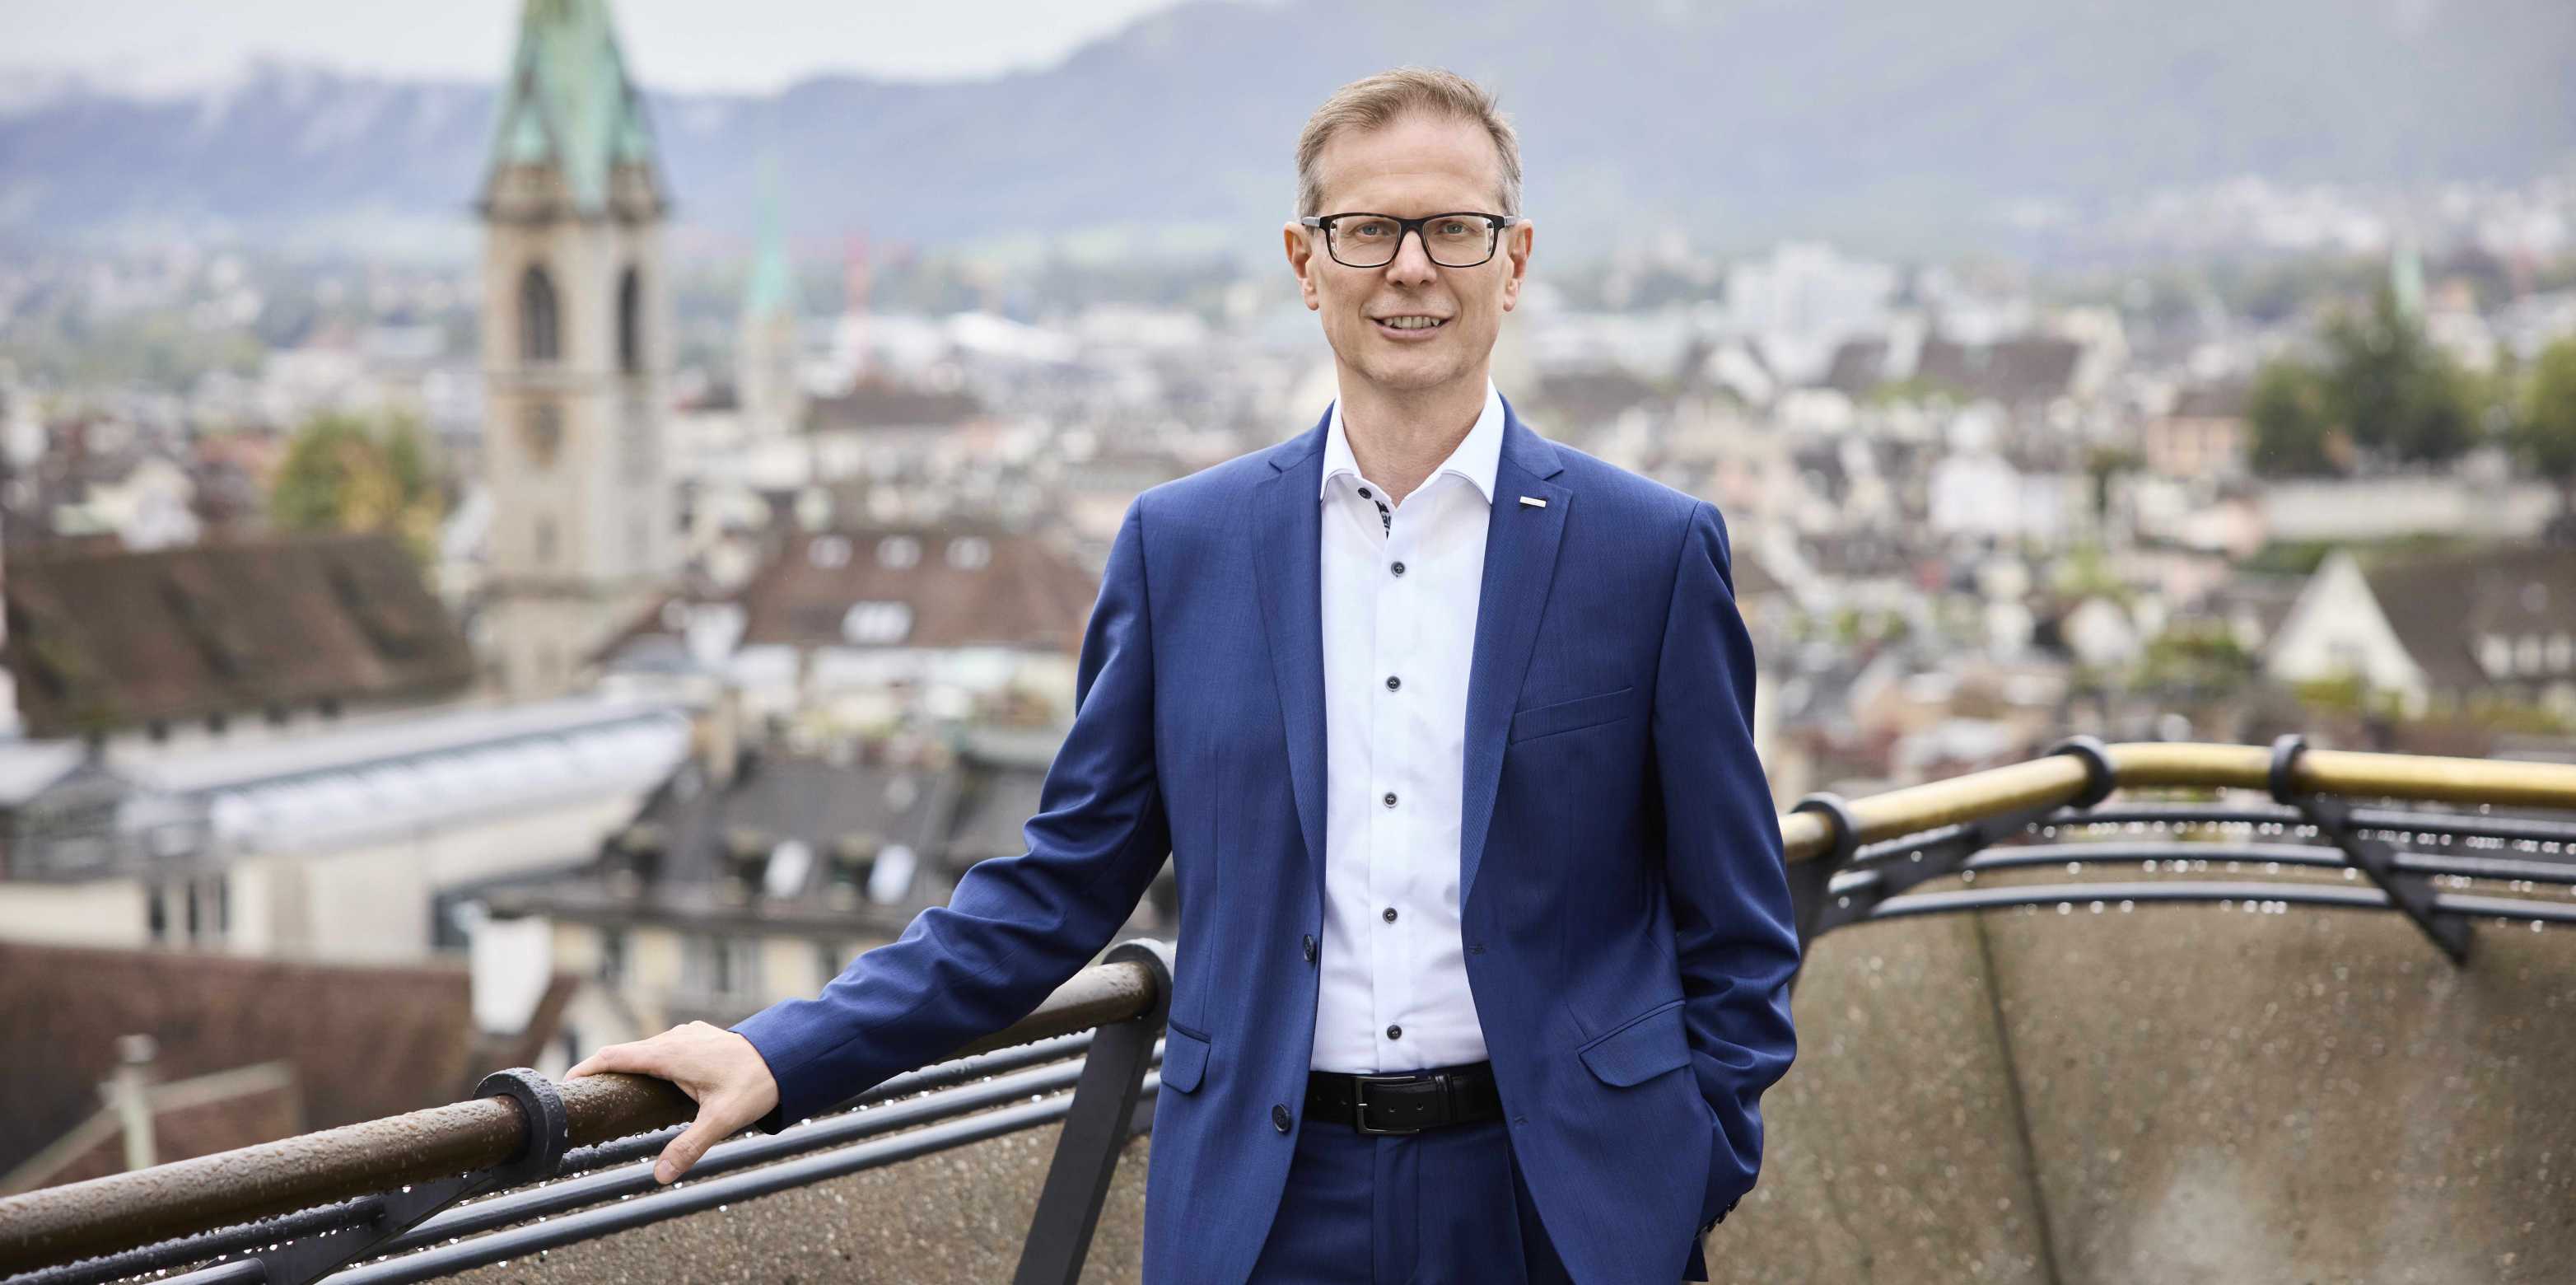 Rector Günther Dissertori wears a blue suit and stands on Polyterasse. The city of Zurich can be seen in the background.